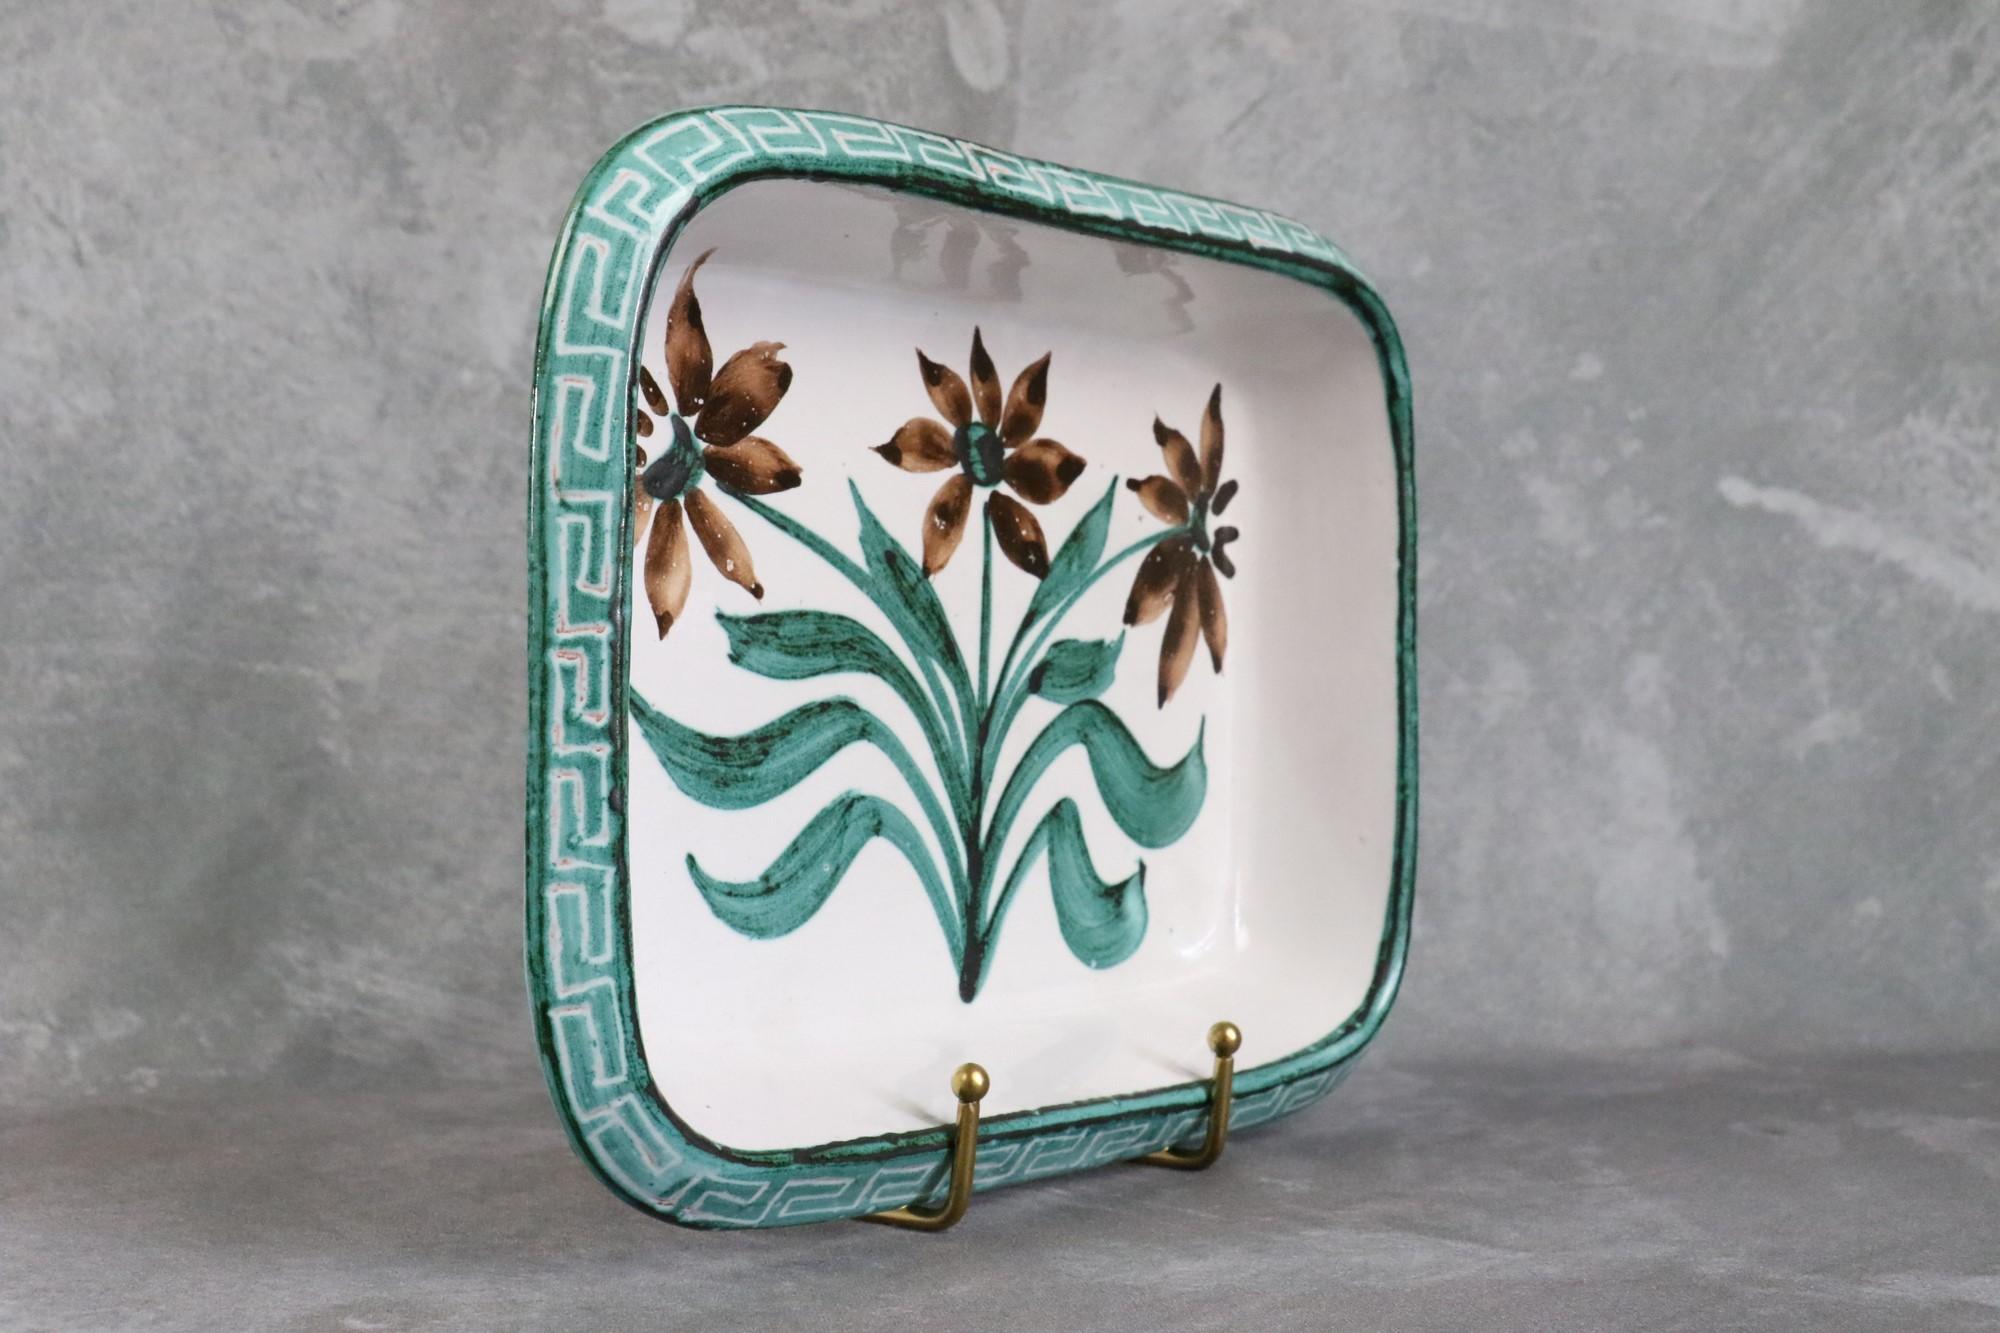 Mid-Century Modern French Ceramic Dish by Robert Picault, Signed, Vallauris, France, 1950s